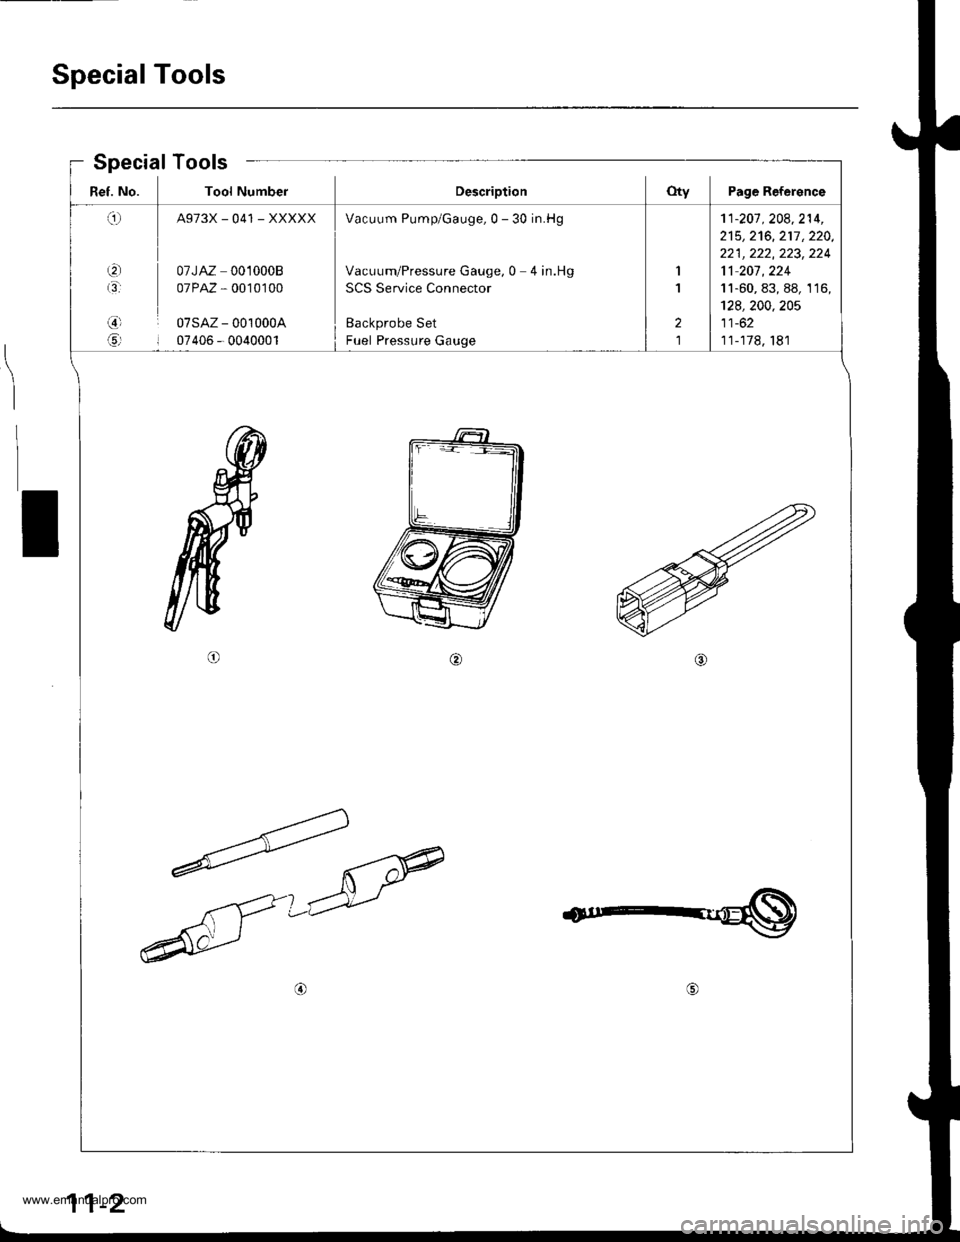 HONDA CR-V 1998 RD1-RD3 / 1.G Owners Guide 
Special Tools
Ref. No. Tool NumberDescriptionOty Page Reference
q
t3
,3)l
6rl
A973X_041 _XXXXX
07JAZ 0010008
07PAZ , 0010100
07sAz - 001000A
07405 - 0040001
Vacuum Pump/Gauge,0 - 30 in.Hg
Vacuum/Pre